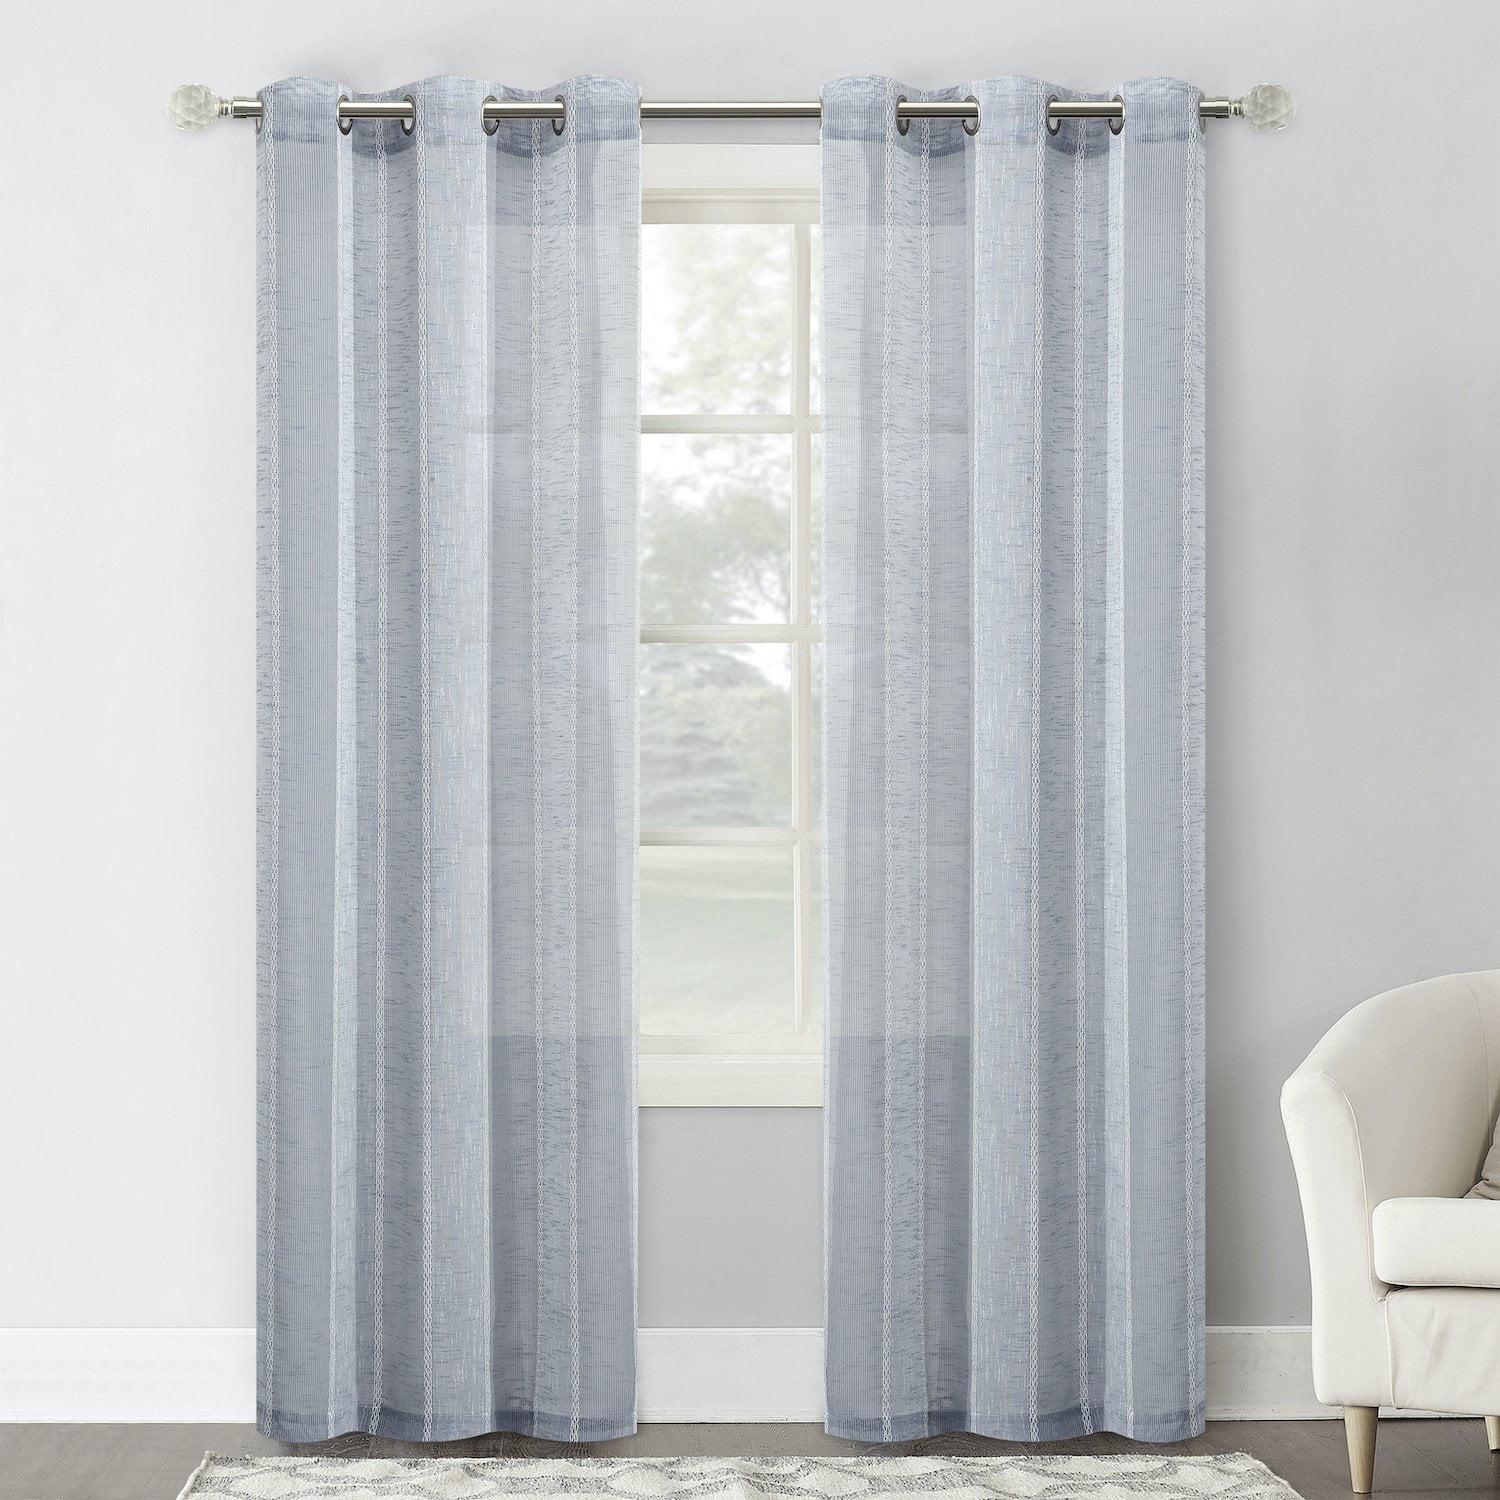 PALE GREY TEXTURED IVORY CHENILLE STRIPES THICK EYELET VOILE CURTAIN PANEL 